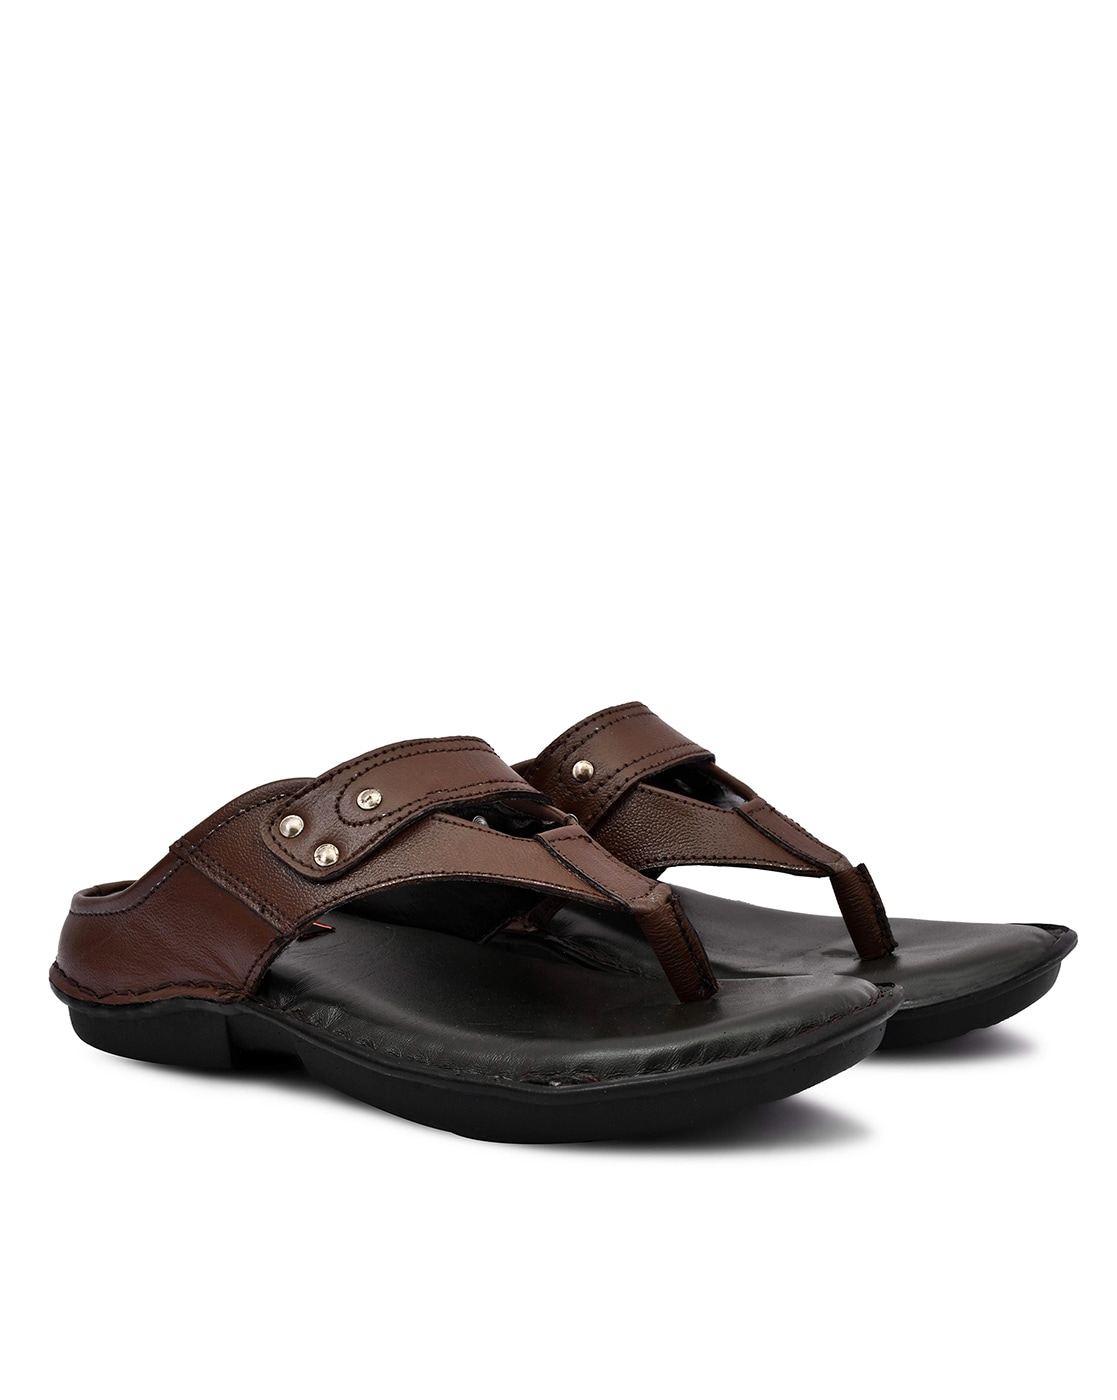 Shop Tan Casual Slippers for Men at Best Prices | Pierre Cardin India